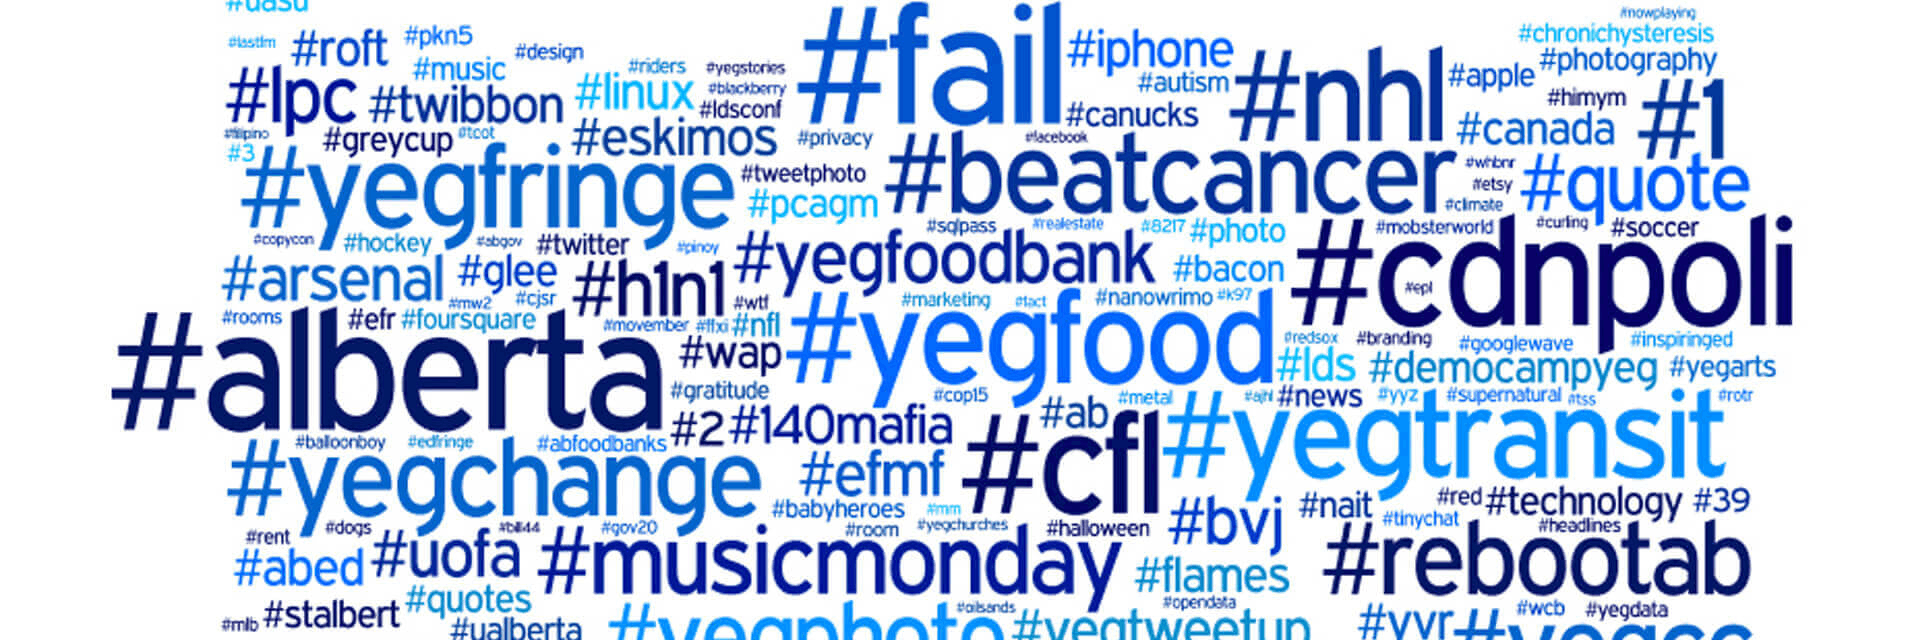 Importance of #Hashtags